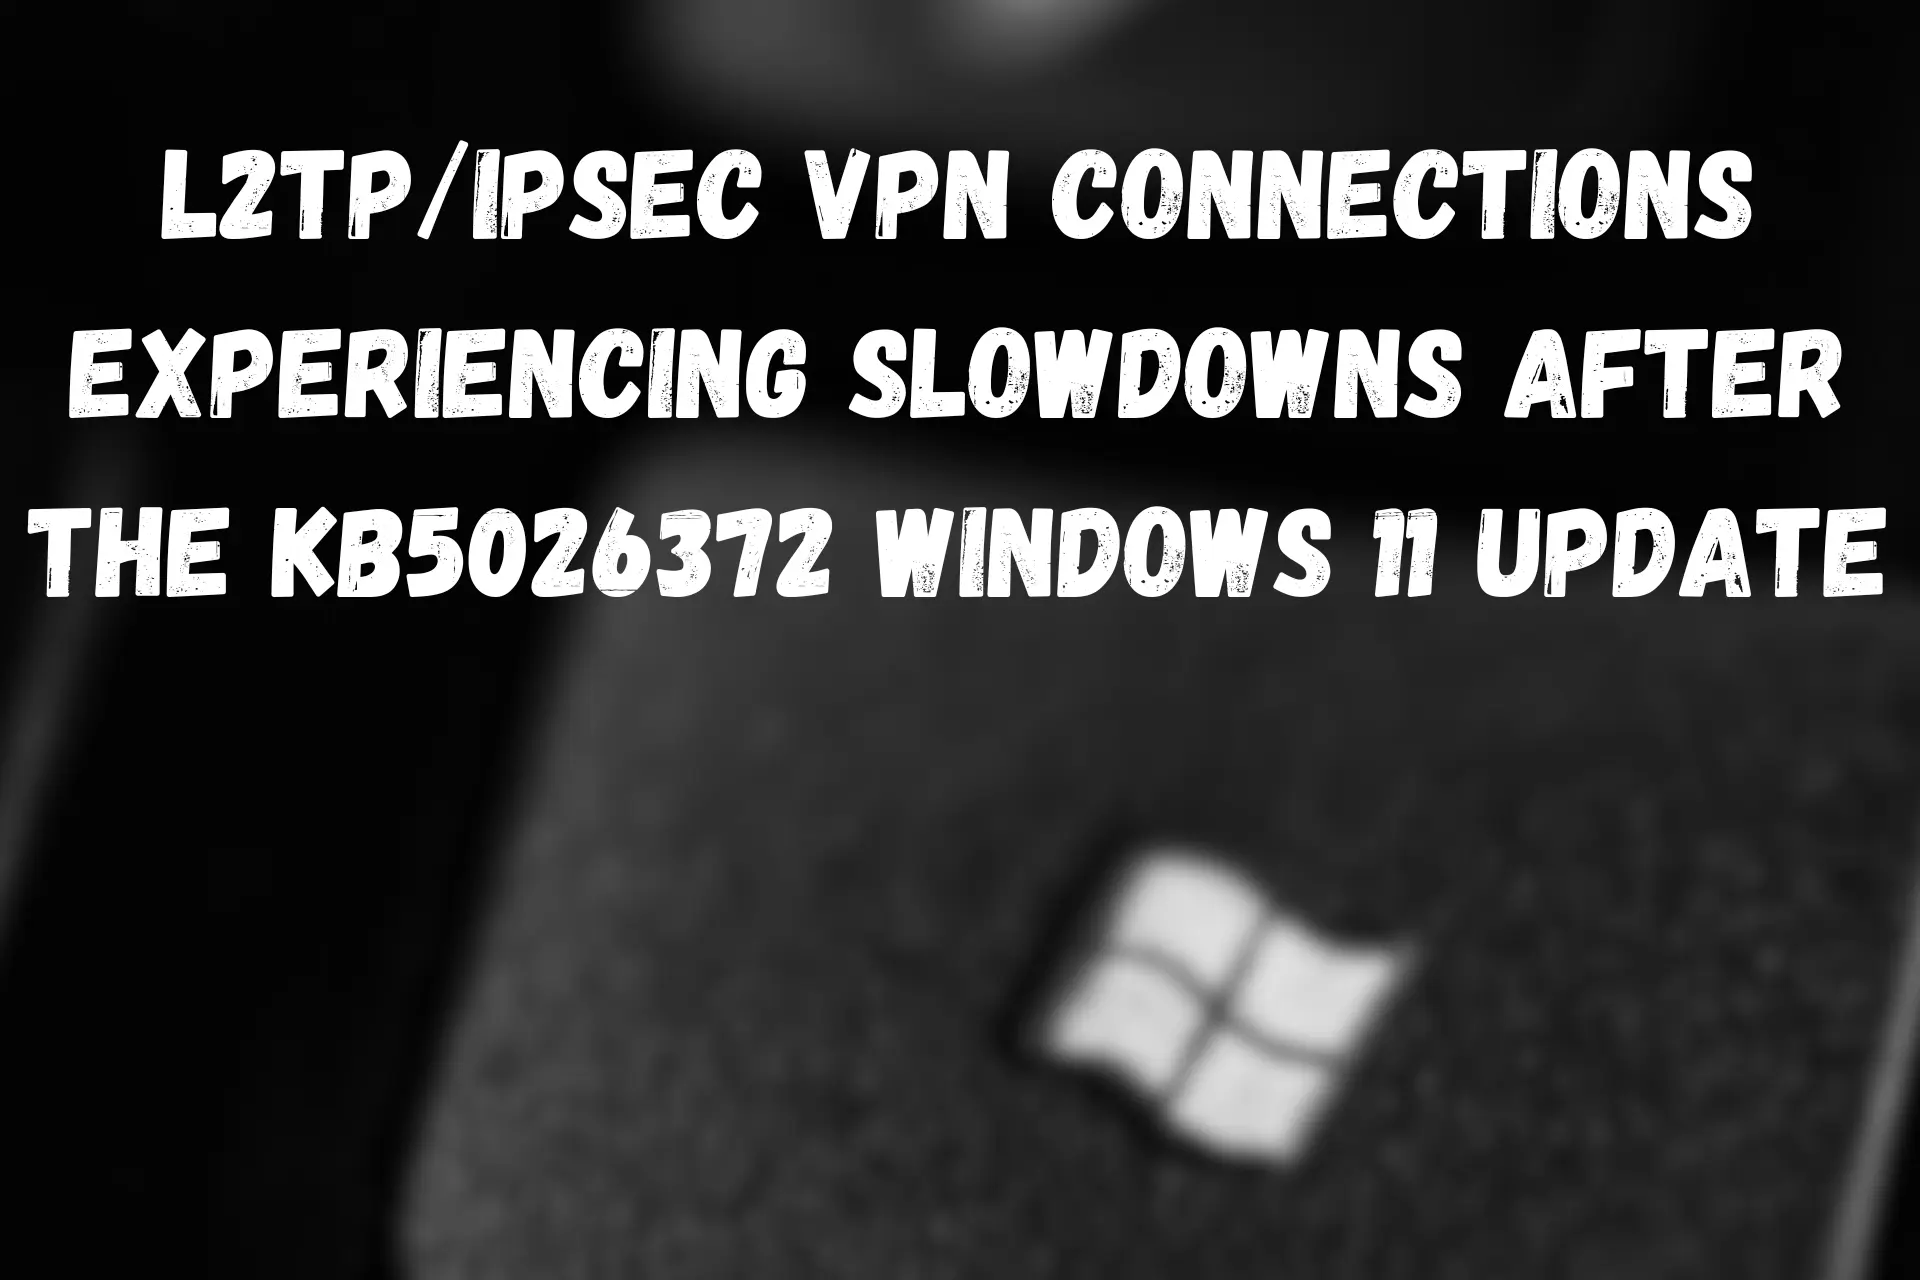 L2TPIPsec VPN Connections Experiencing Slowdowns after the KB5026372 Windows 11 Update